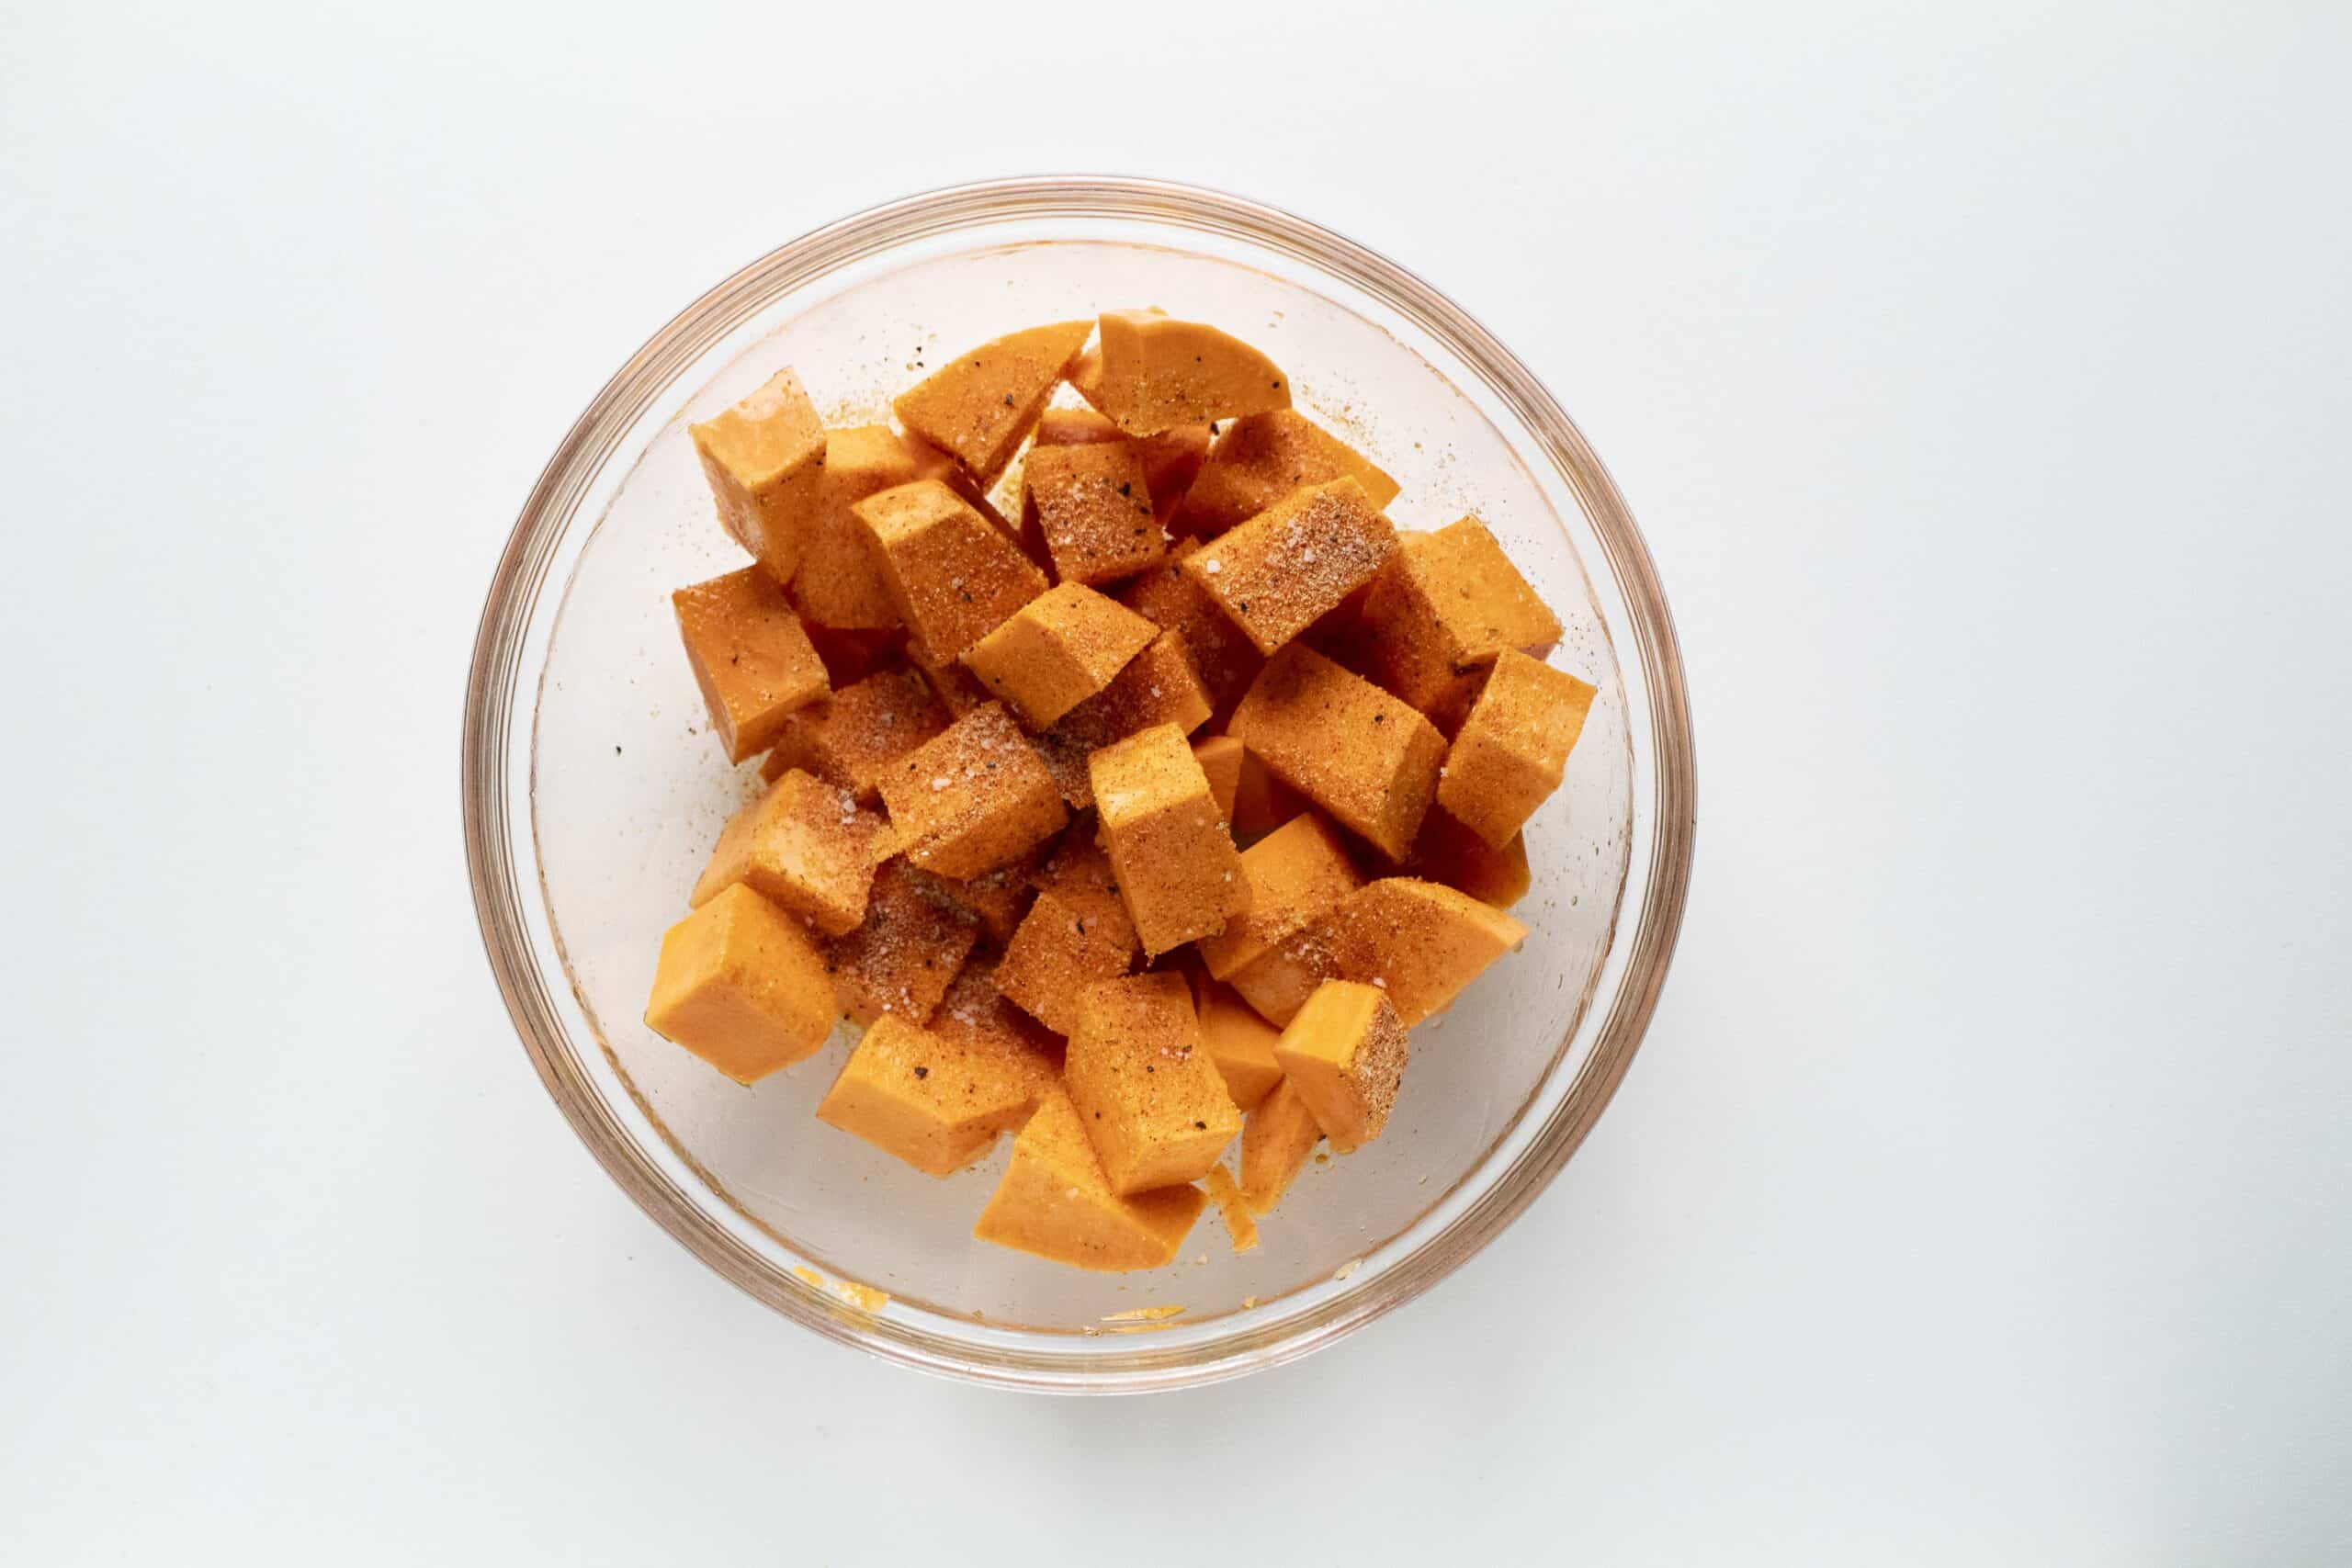 Diced and seasoned sweet potatoes in a bowl.